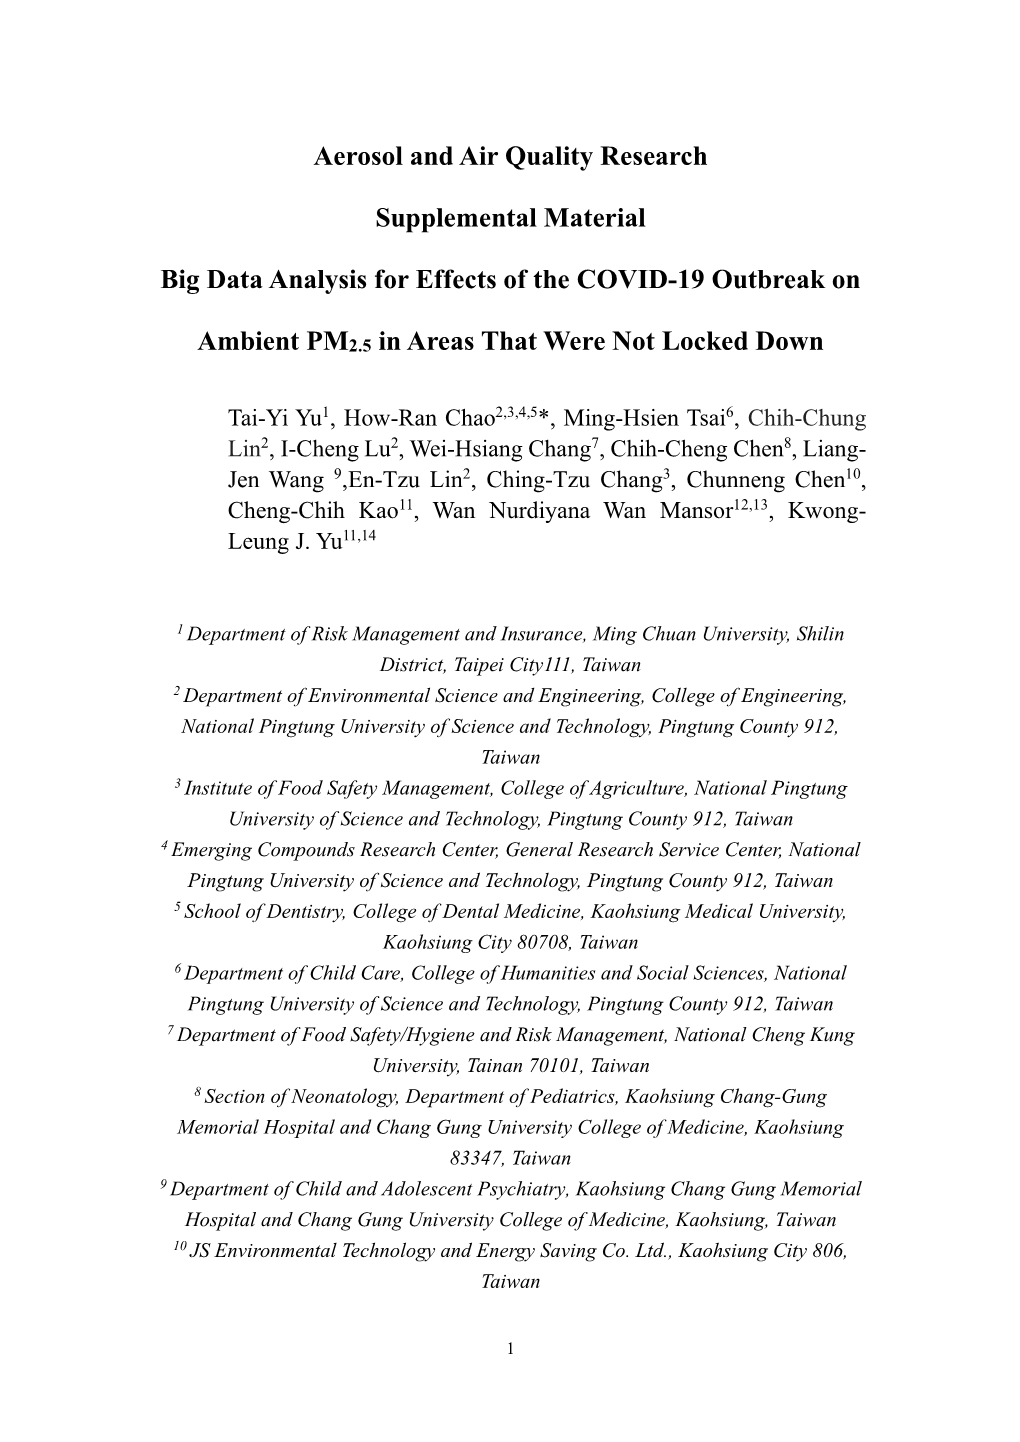 Aerosol and Air Quality Research Supplemental Material Big Data Analysis for Effects of the COVID-19 Outbreak on Ambient PM2.5 I